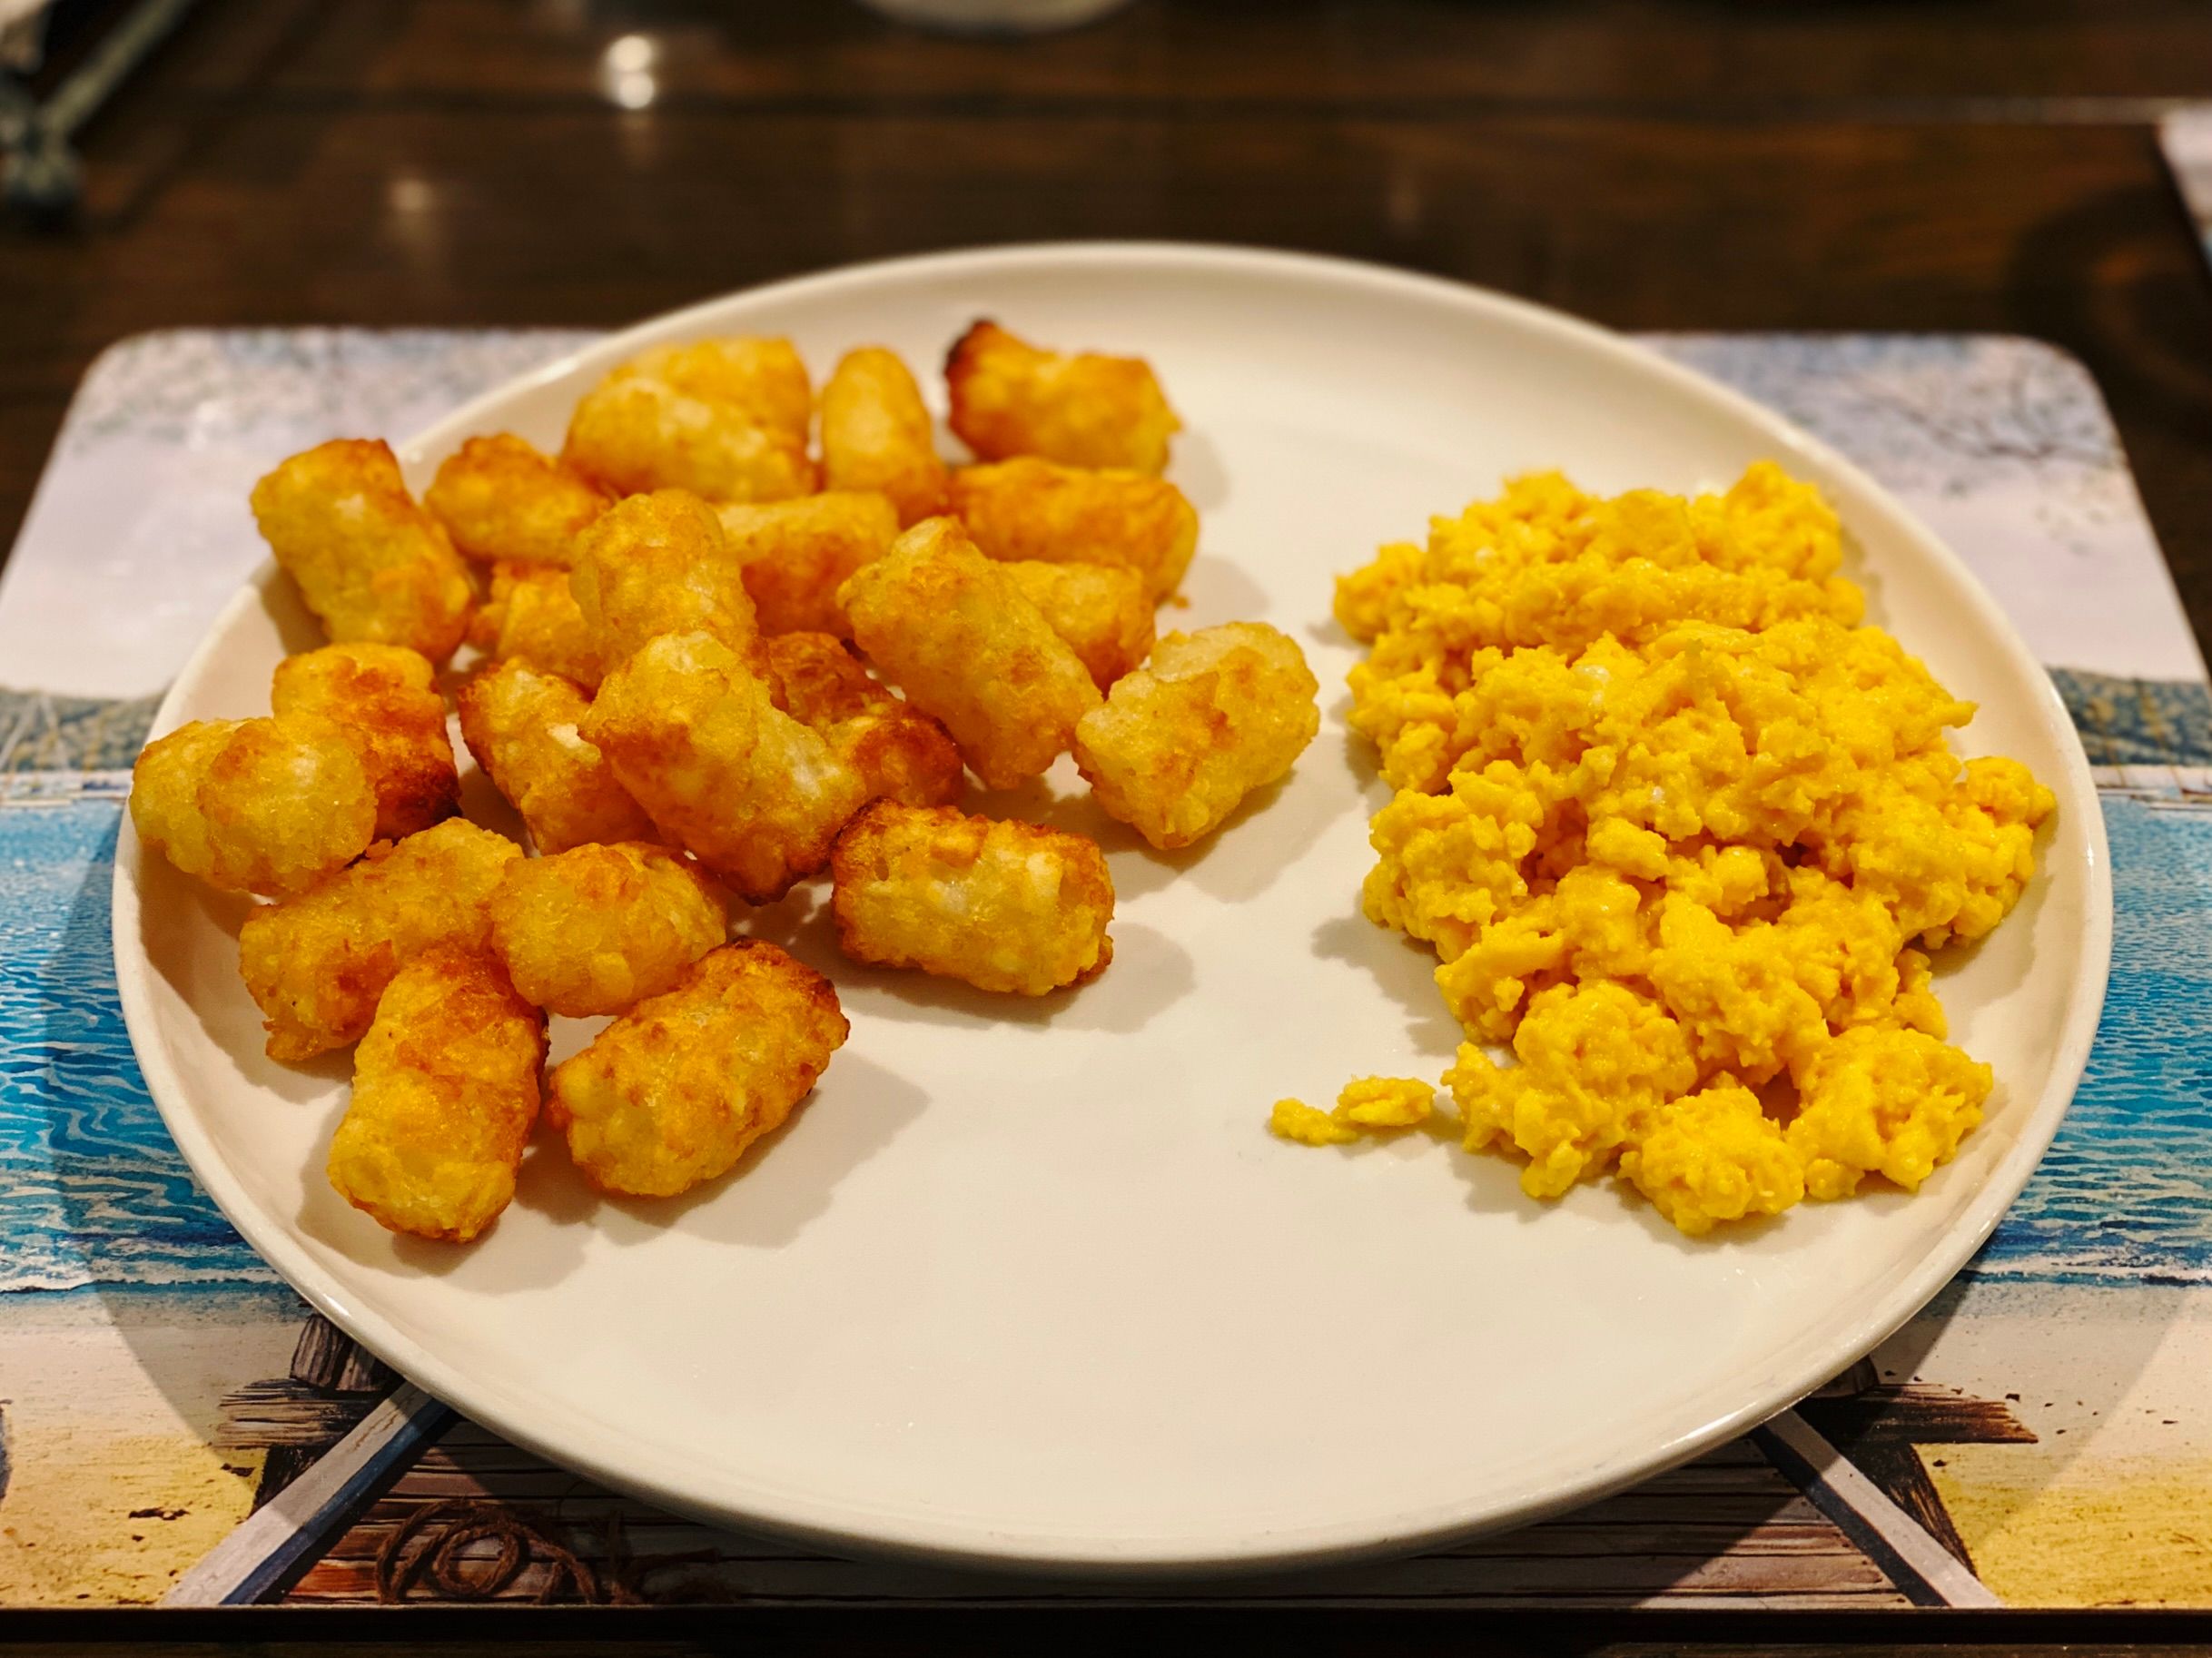 A photo of scrambled eggs and potato gems sitting on a plate. The potato gems are golden-brown and crispy, and the eggs are fluffy.